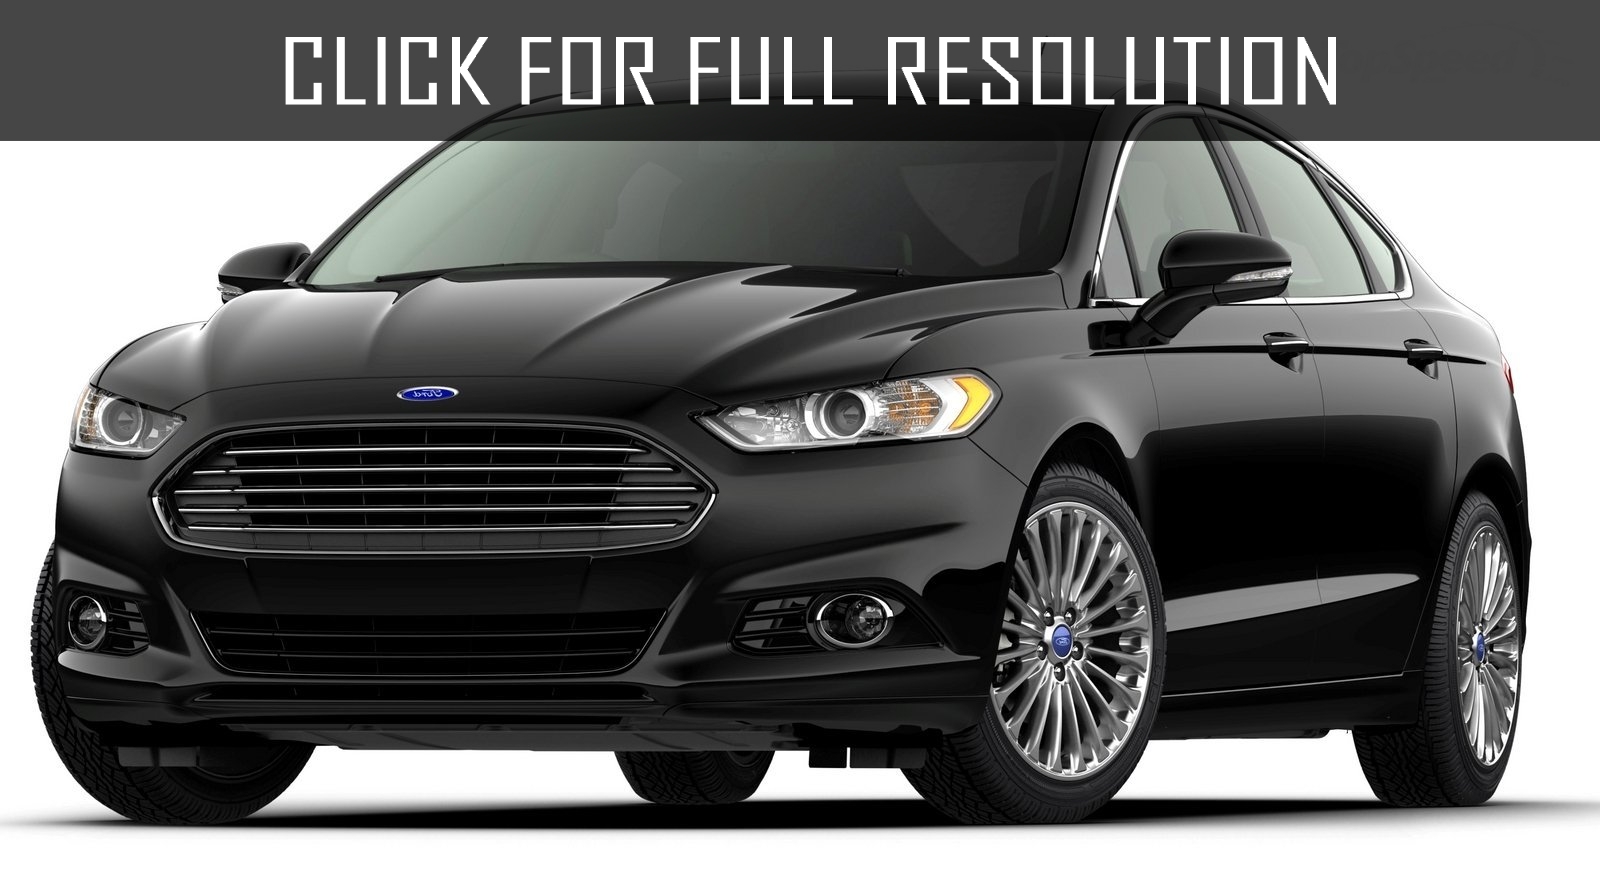 2014 Ford Fusion Titanium news, reviews, msrp, ratings